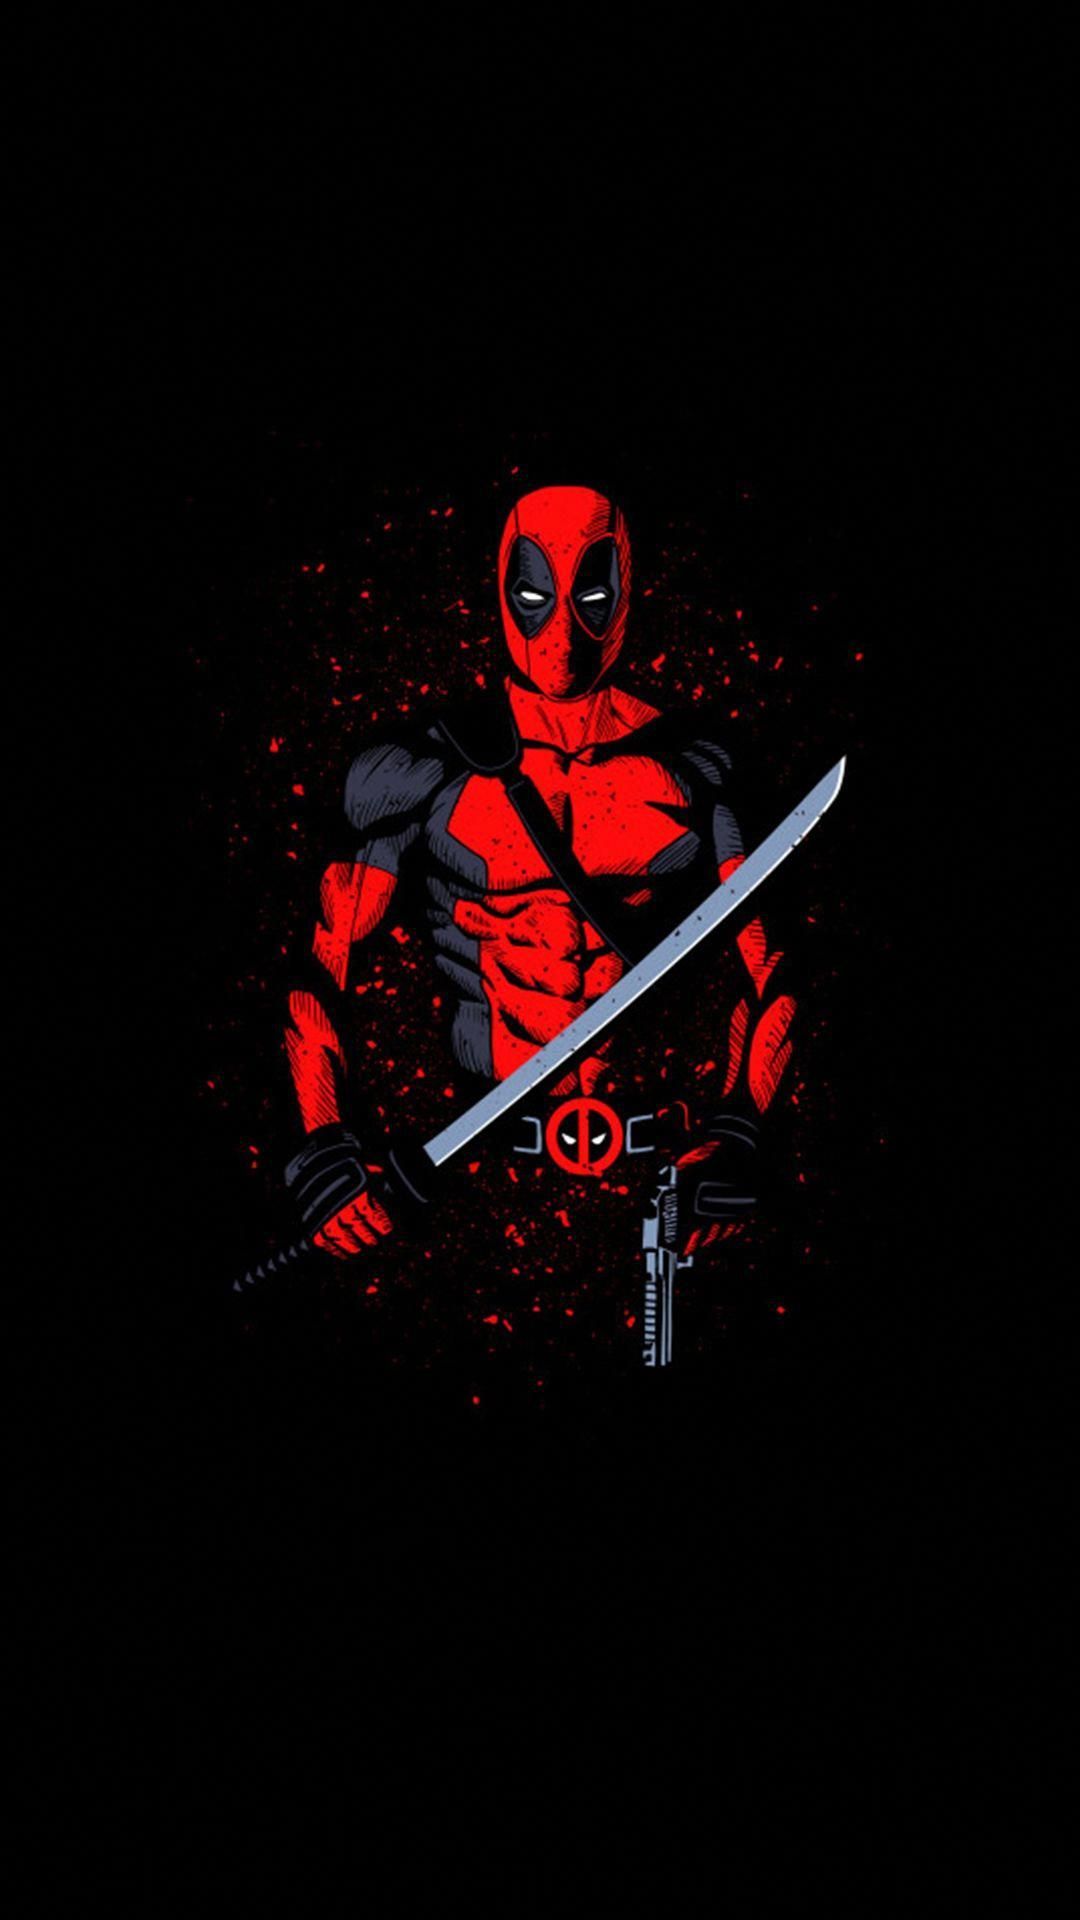 iPhone Wallpaper for iPhone iPhone 8 Plus, iPhone 6s, iPhone 6s Plus, iPhone X and iPod Touch Hig. Superhero wallpaper, Avengers wallpaper, Deadpool wallpaper